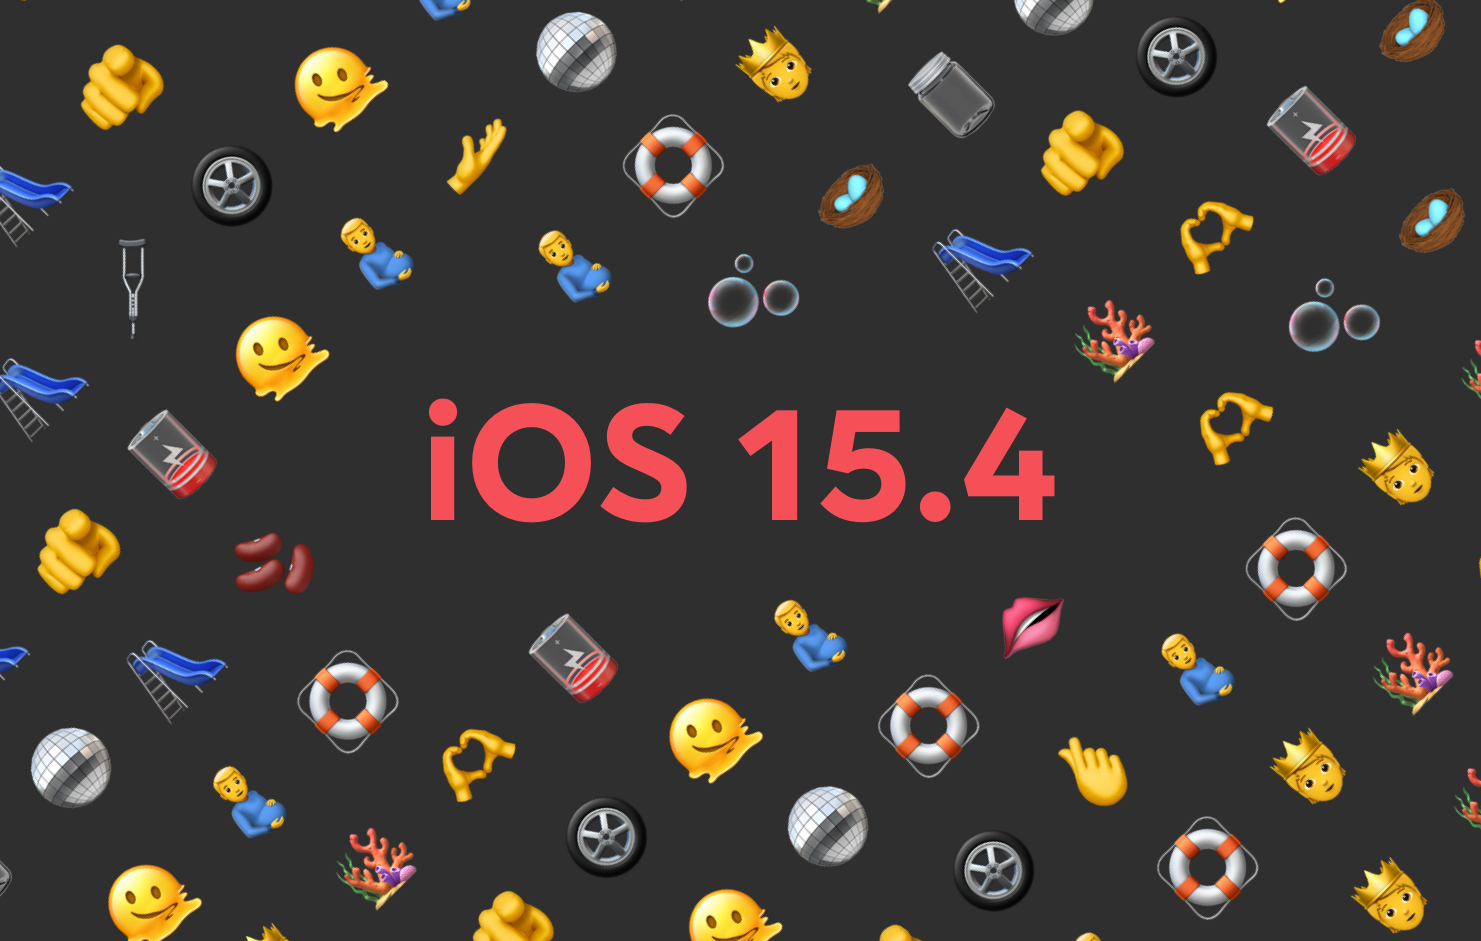 Our Top Three Features in iOS 15.4 and macOS 12.3